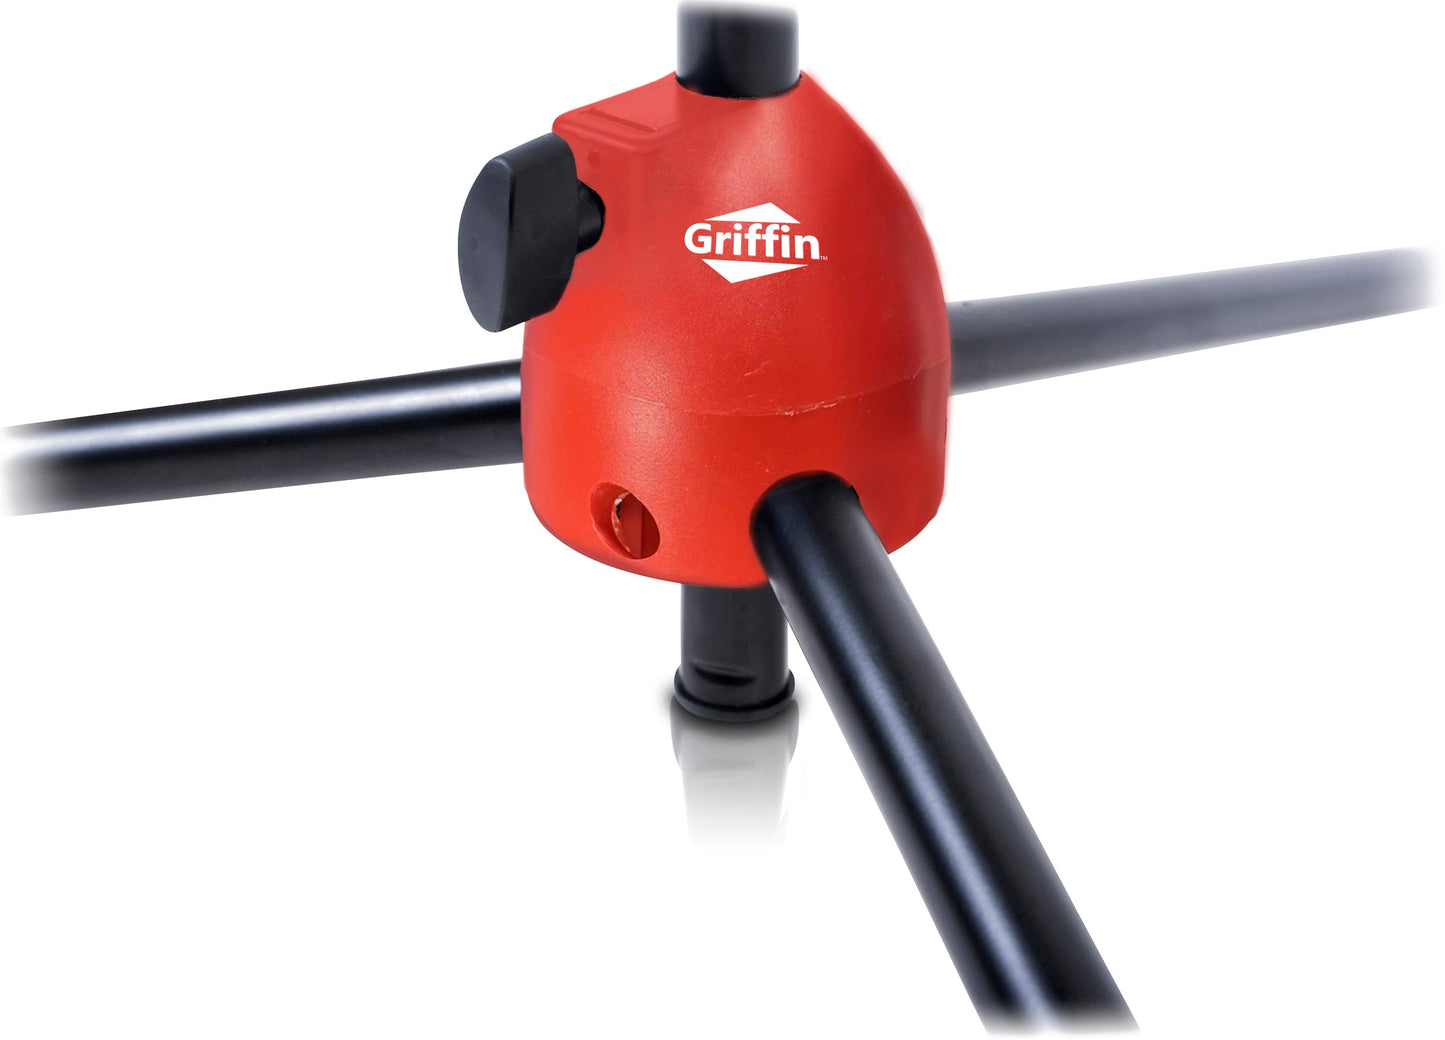 GRIFFIN Microphone Boom Stand (Pack of 6) with XLR Cables & Mic Clip - Telescopic Arm Tripod Legs for Studio Recording Accessories, Singing Karaoke